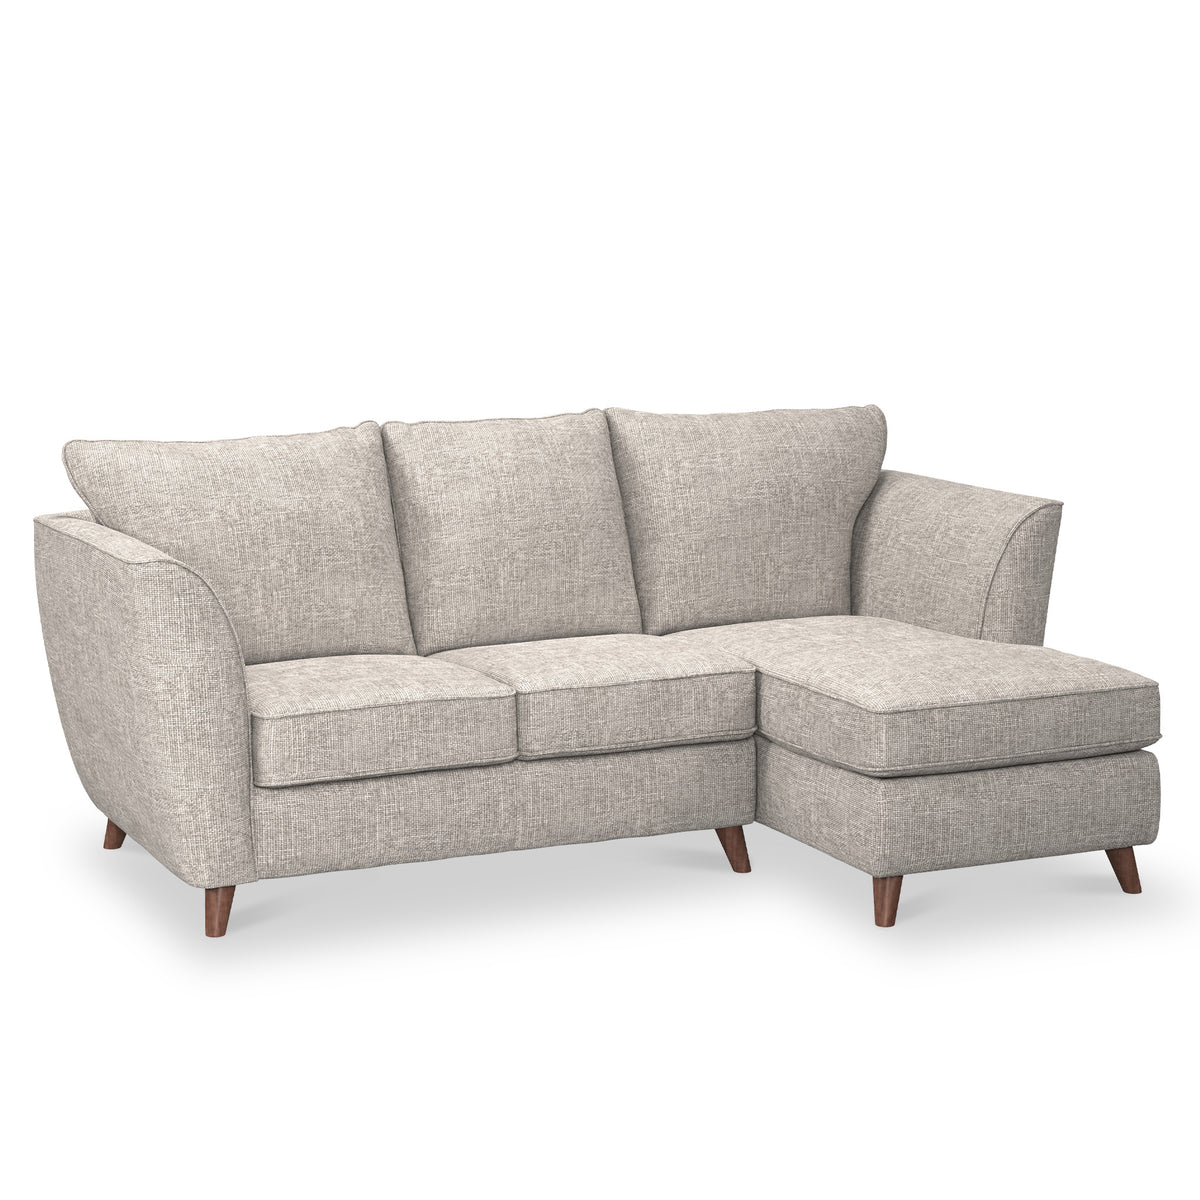 Tamsin Stone Right Hand Chaise Sofa from Roseland Furniture